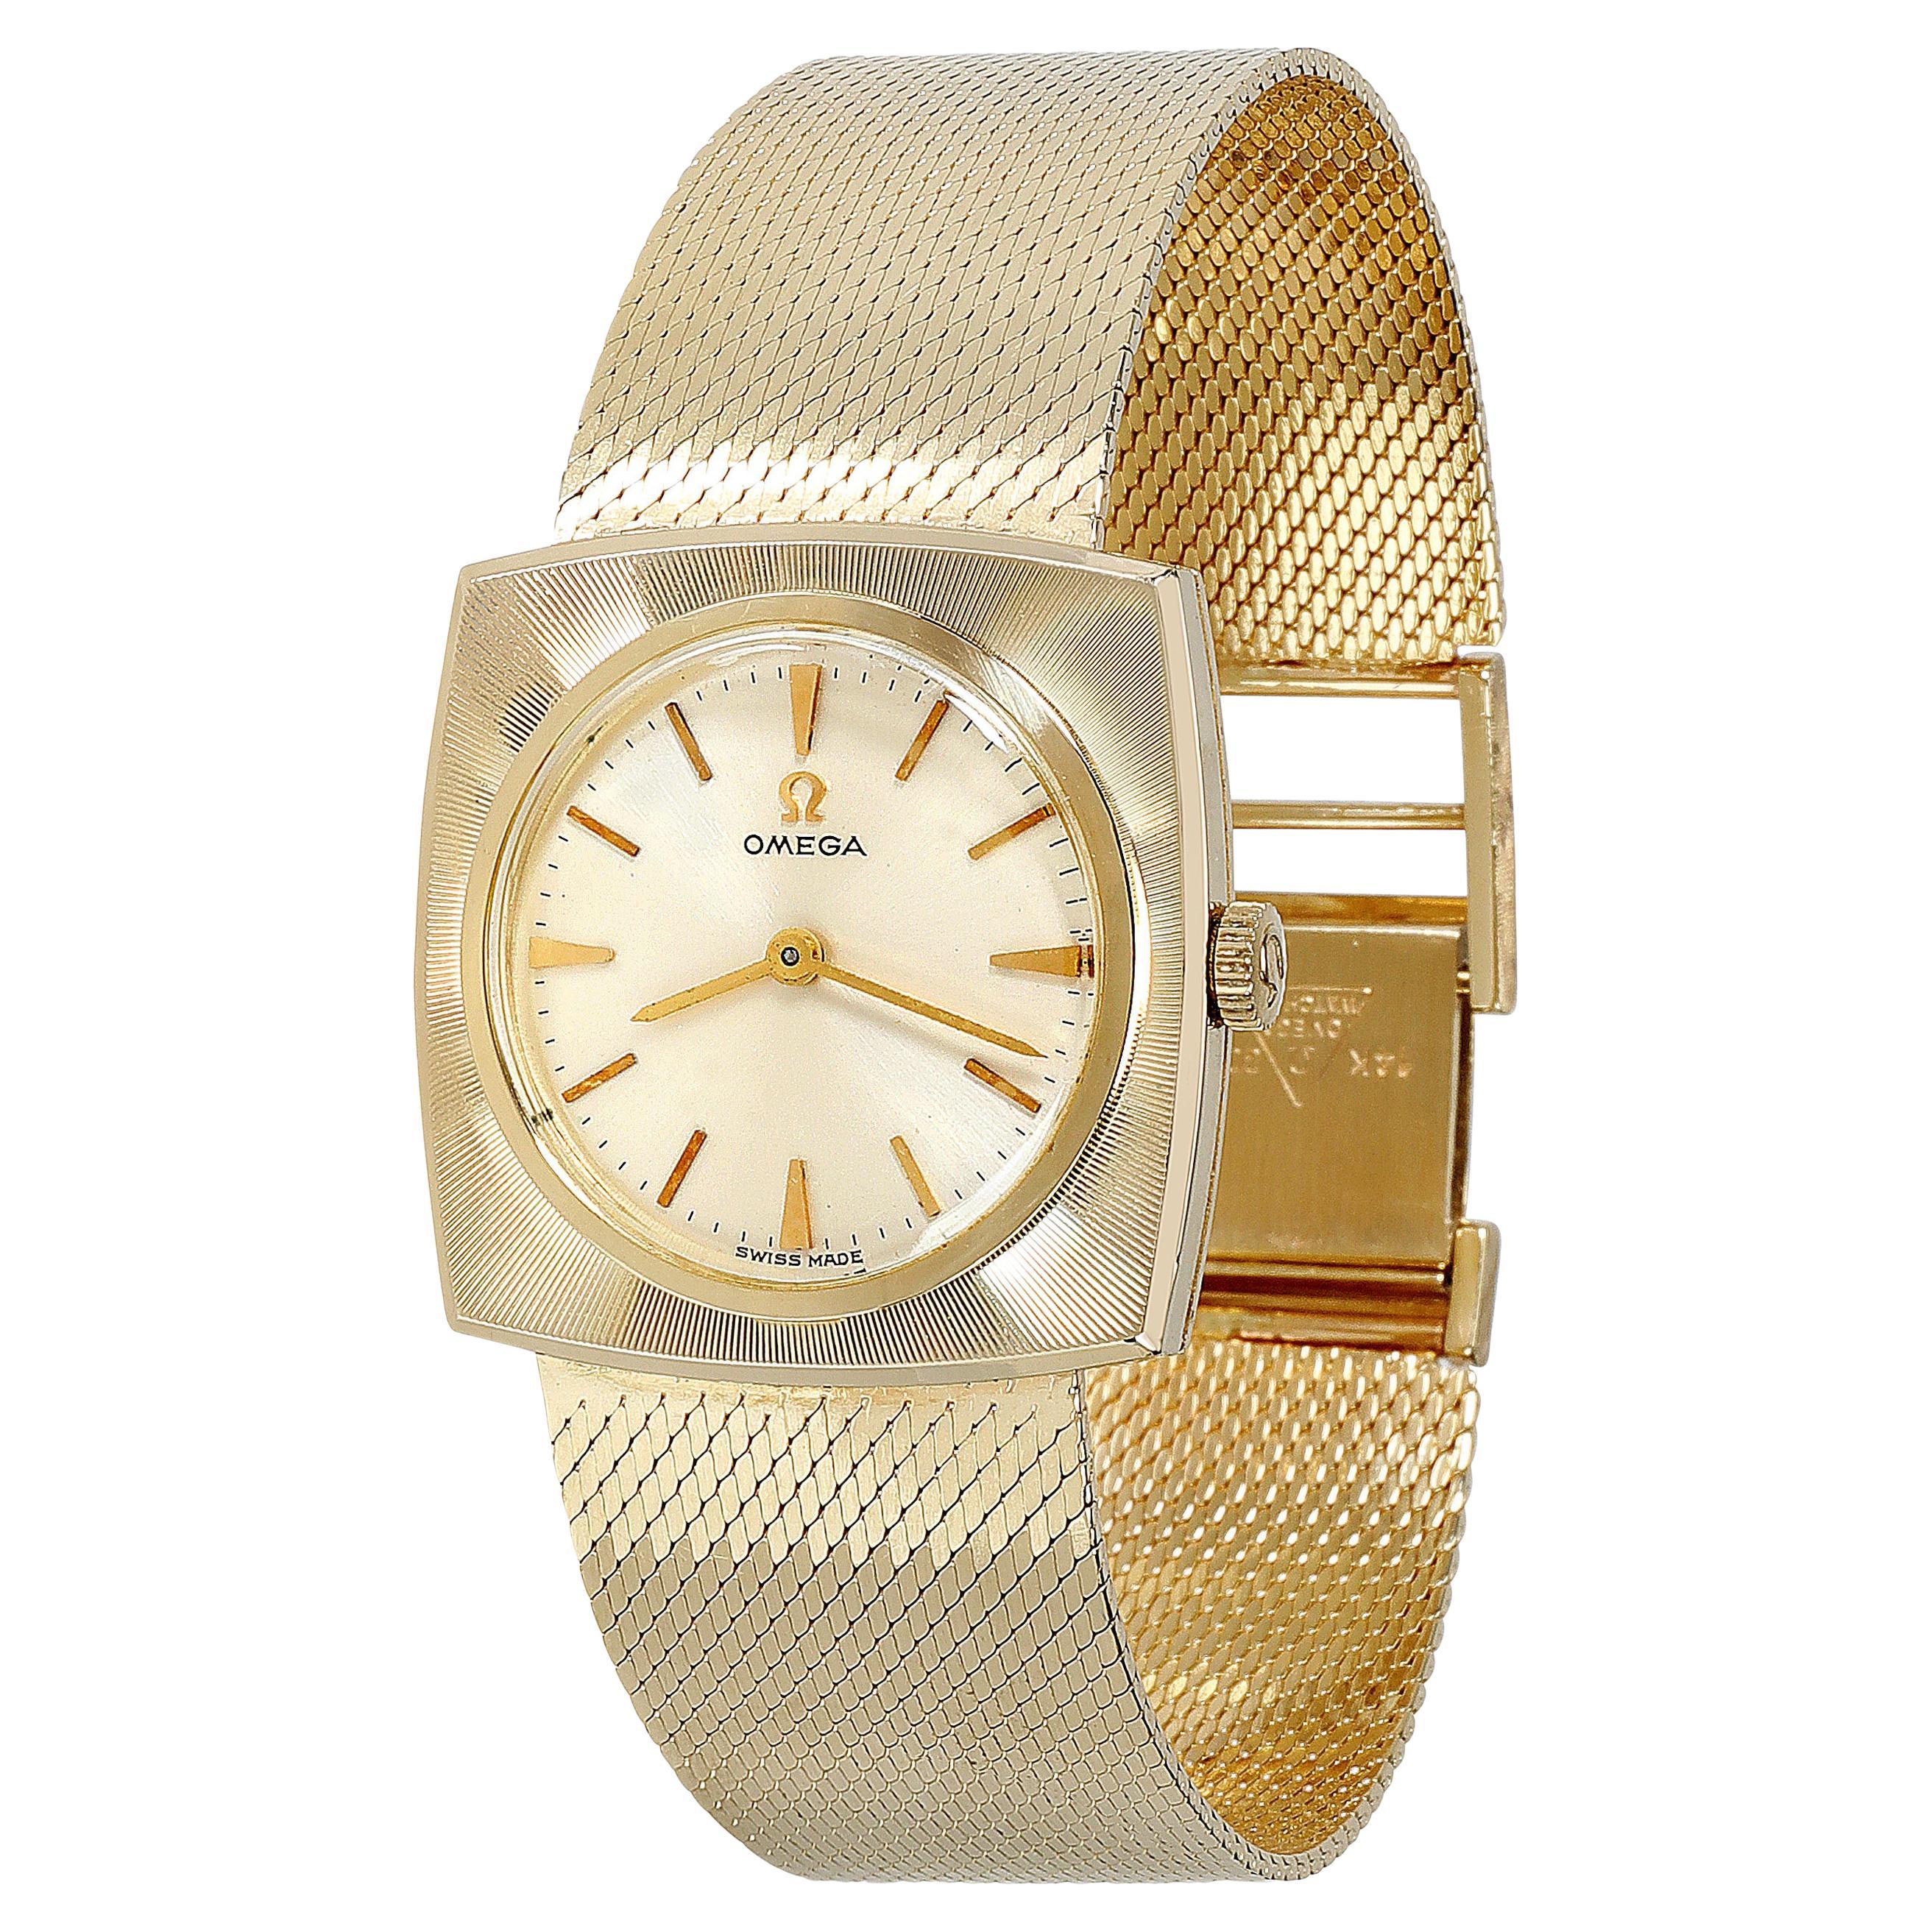 Omega Classique WV3007-480 Women's Watch in 14kt Yellow Gold